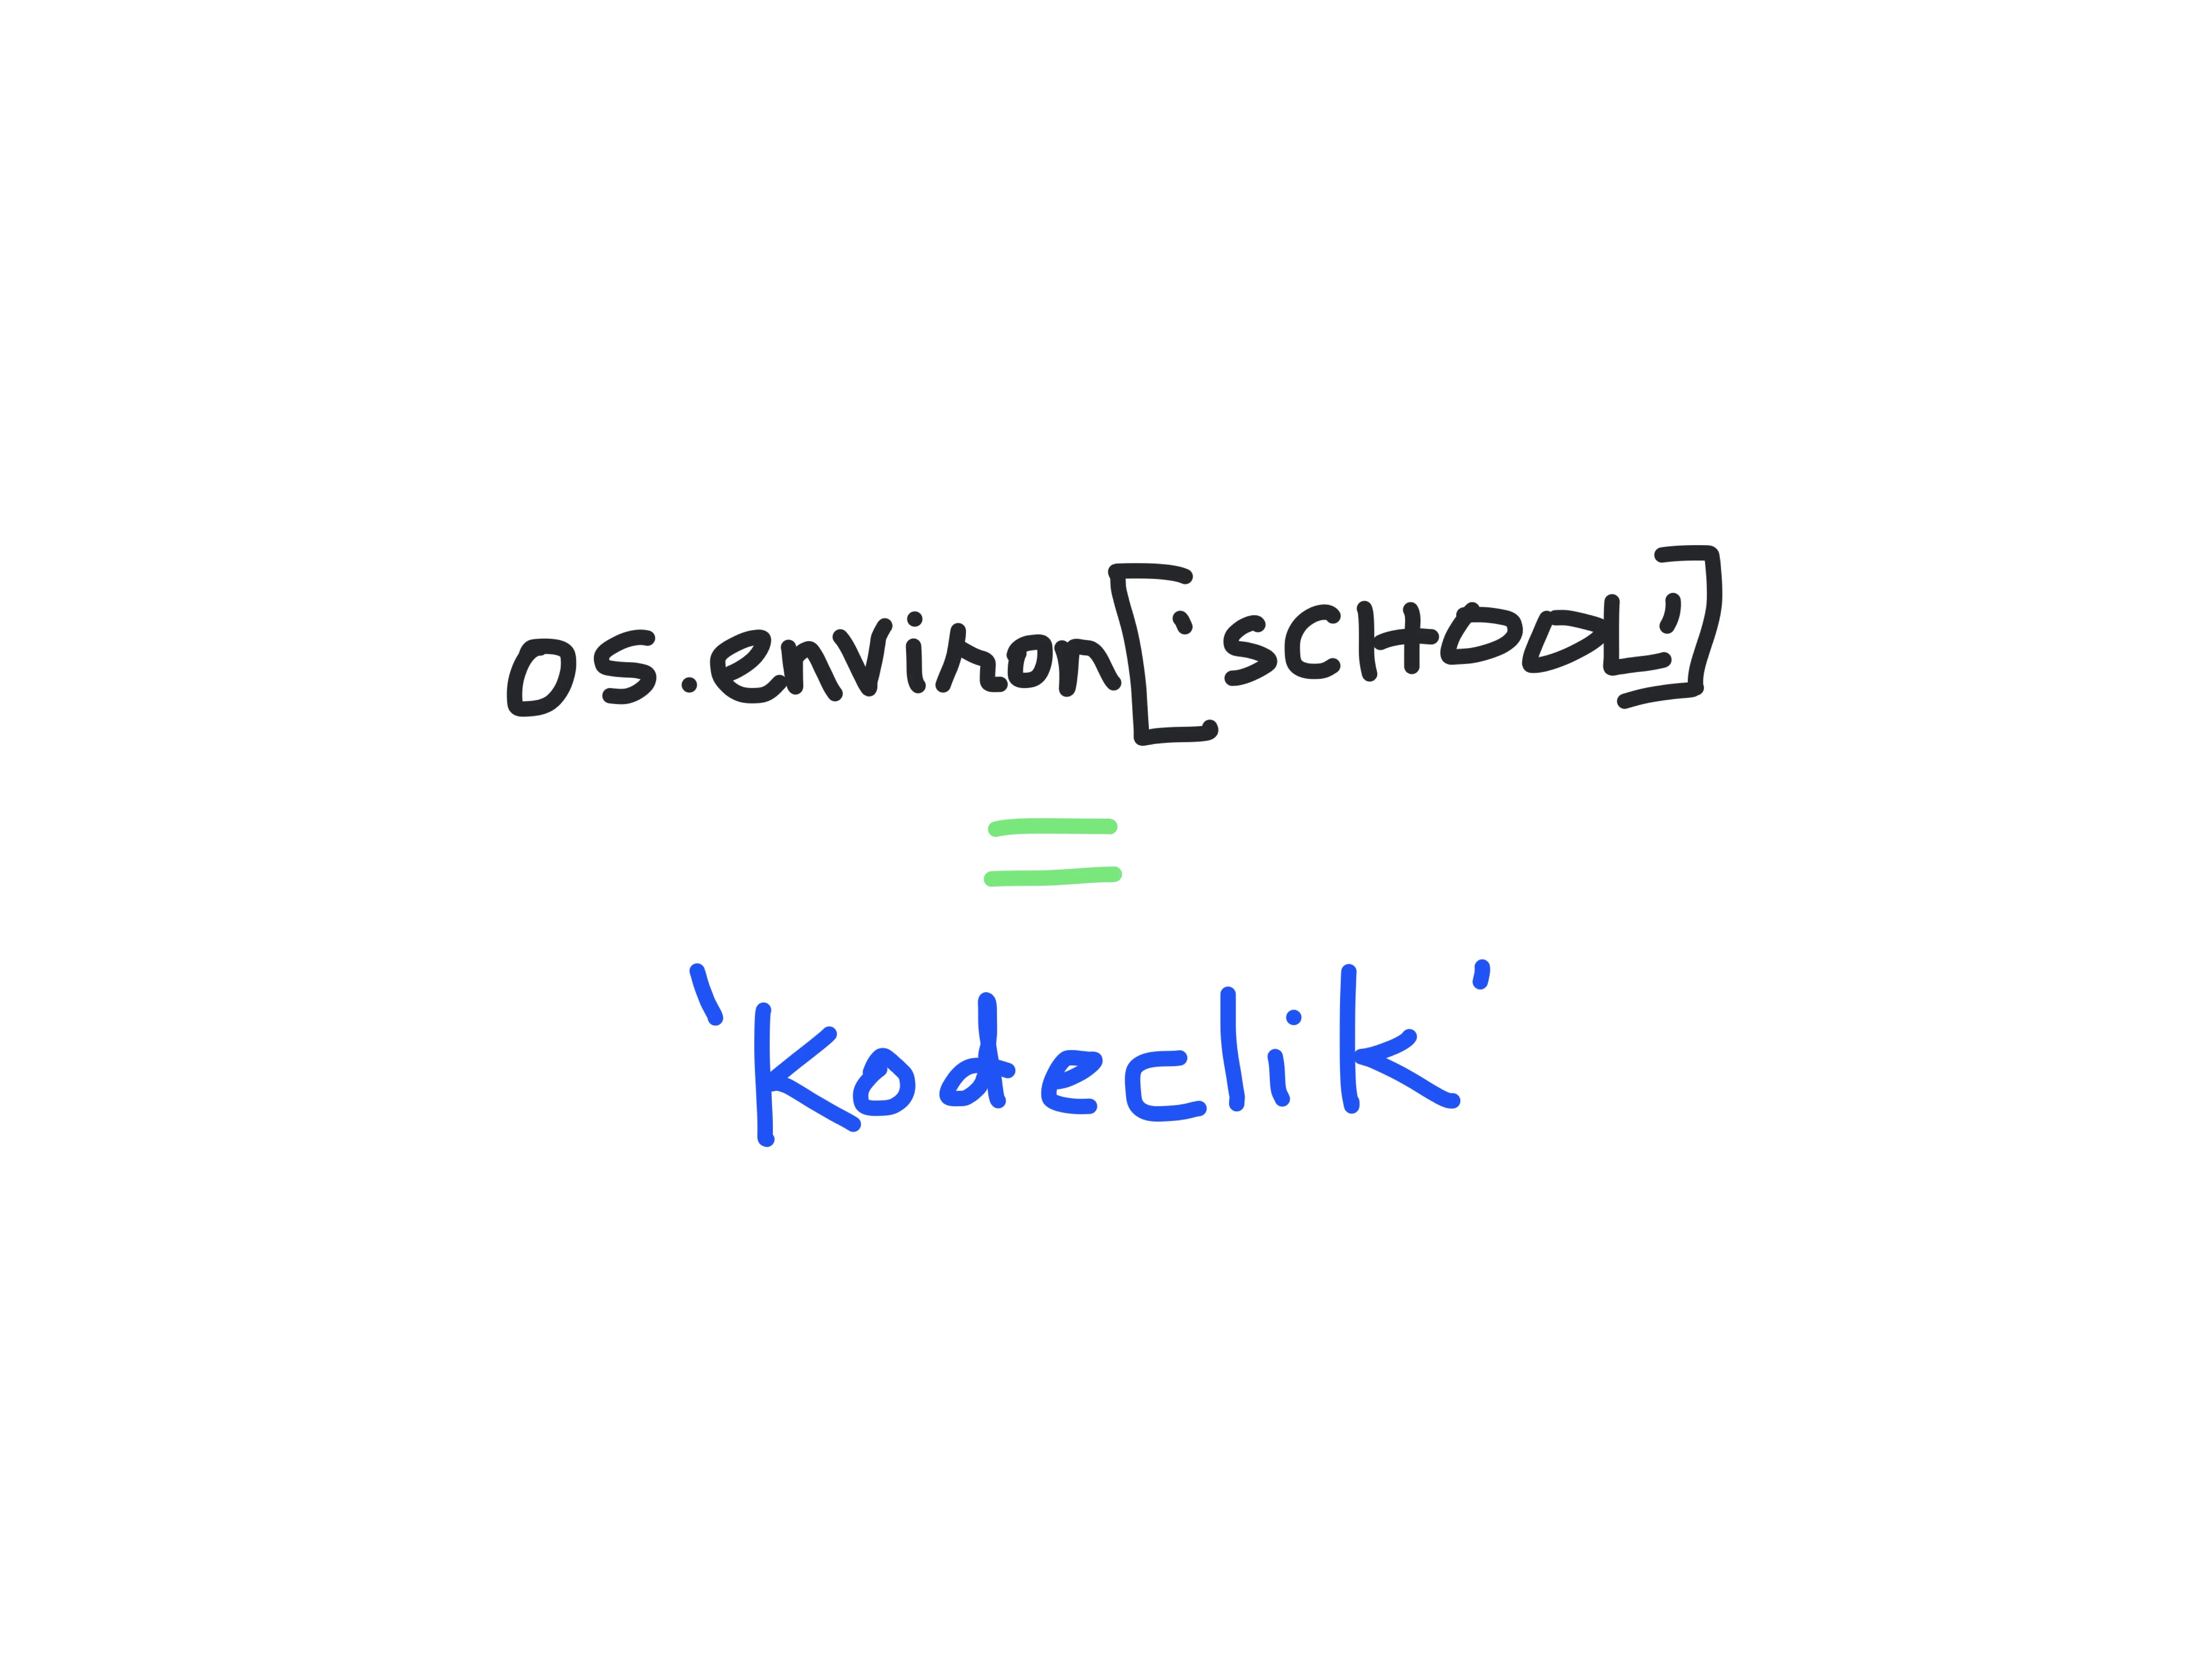 How to get Mods in Minecraft Education Edition - Kodeclik